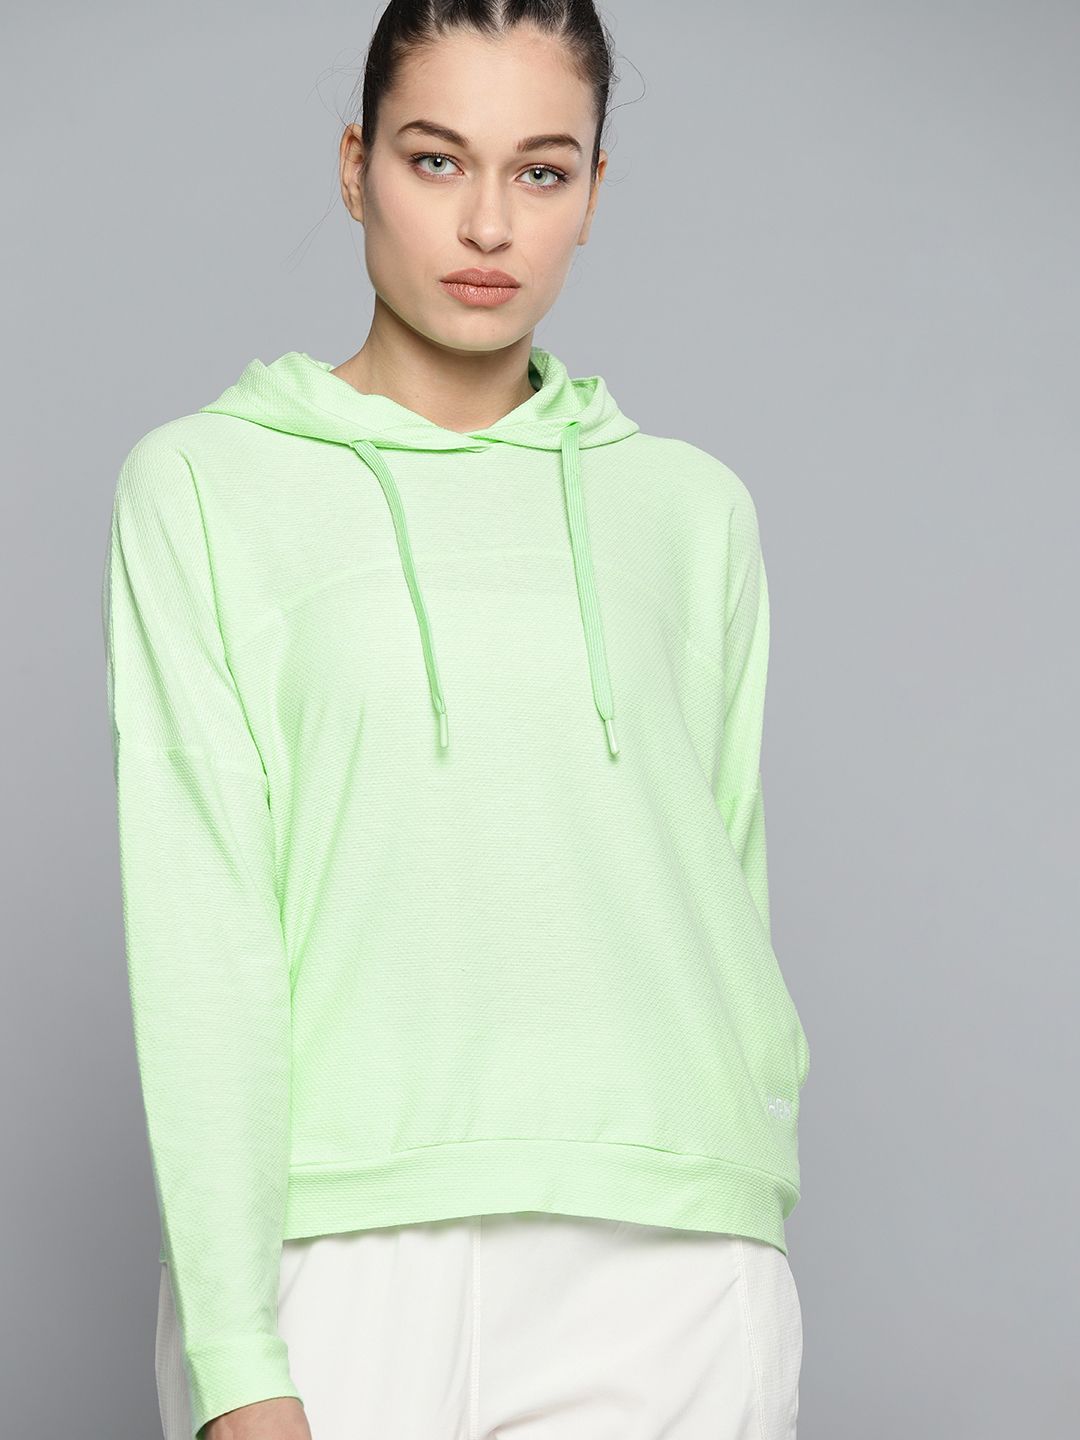 HRX By Hrithik Roshan Lifestyle Women Neo Mint Rapid-Dry Solid Sweatshirt Price in India